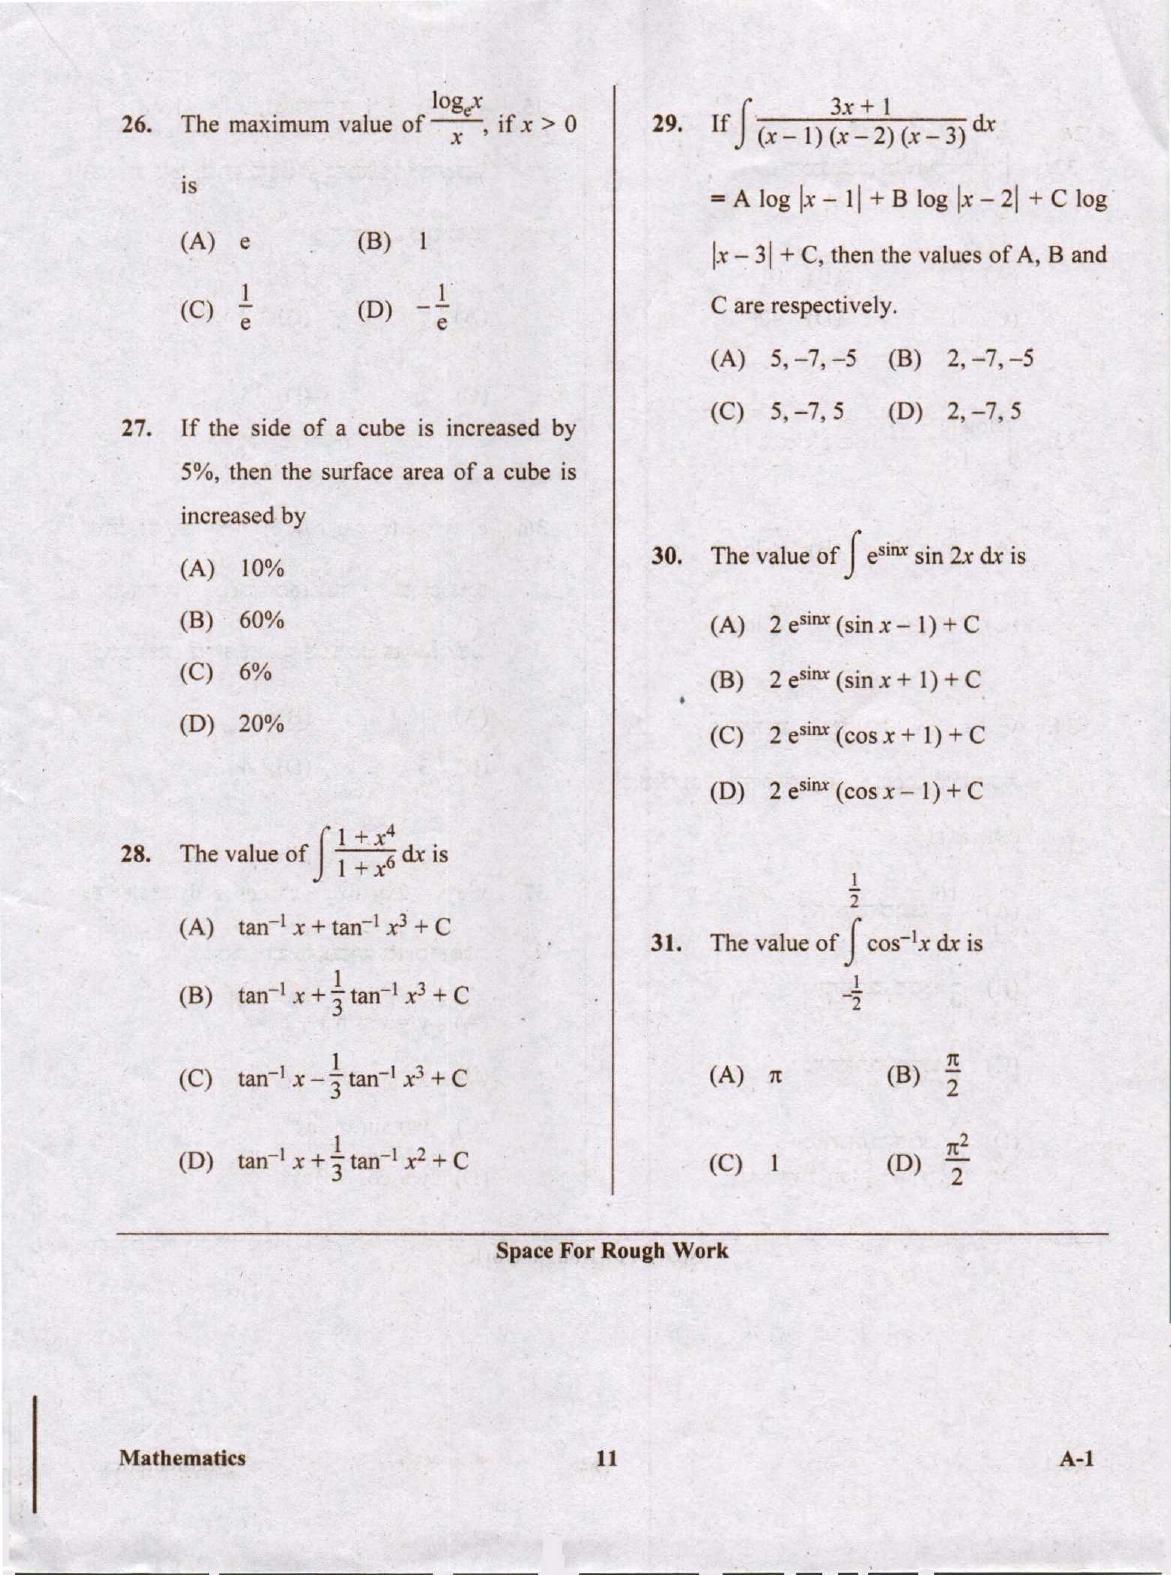 KCET Mathematics 2020 Question Papers - Page 11